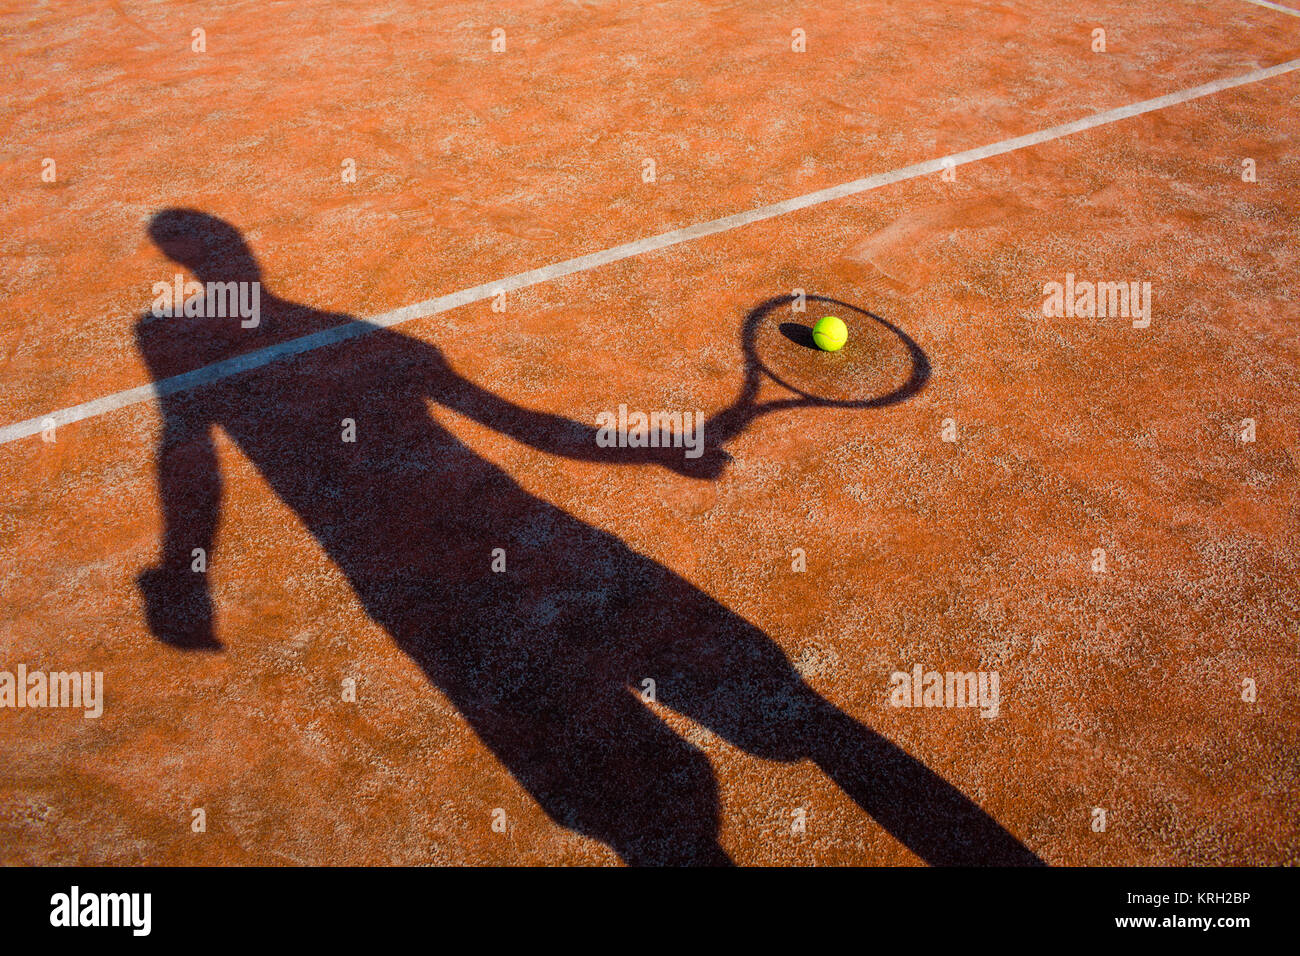 shadow of a tennis player in action on a tennis court (conceptual image with a tennis ball lying on the court and the shadow of the player positioned in a way he seems to be playing it) Stock Photo